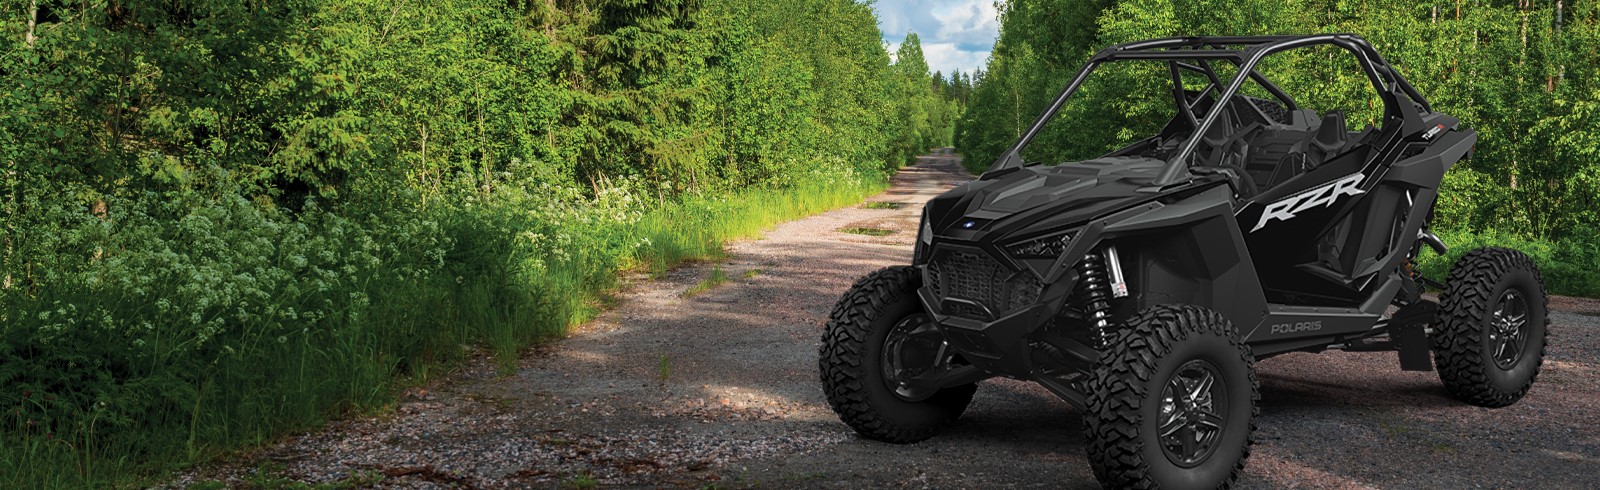 Picture of an RZR ATV